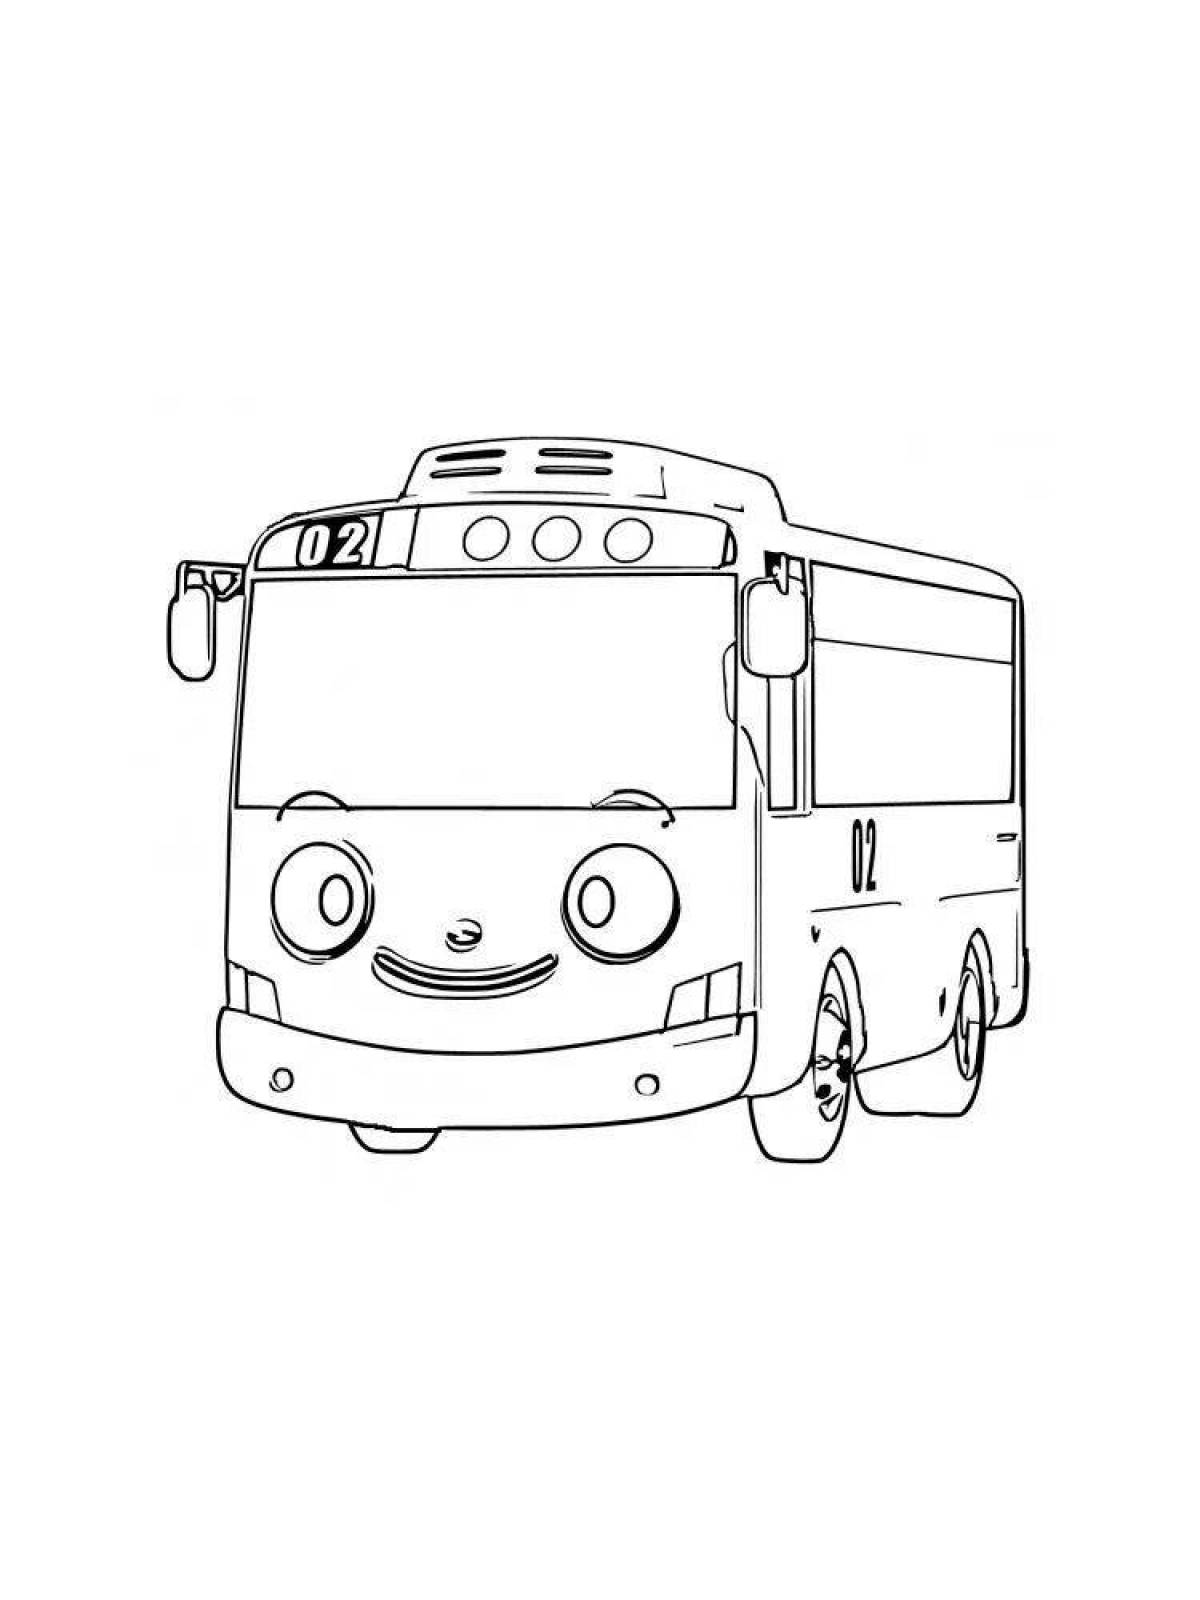 Impressive electric bus coloring page